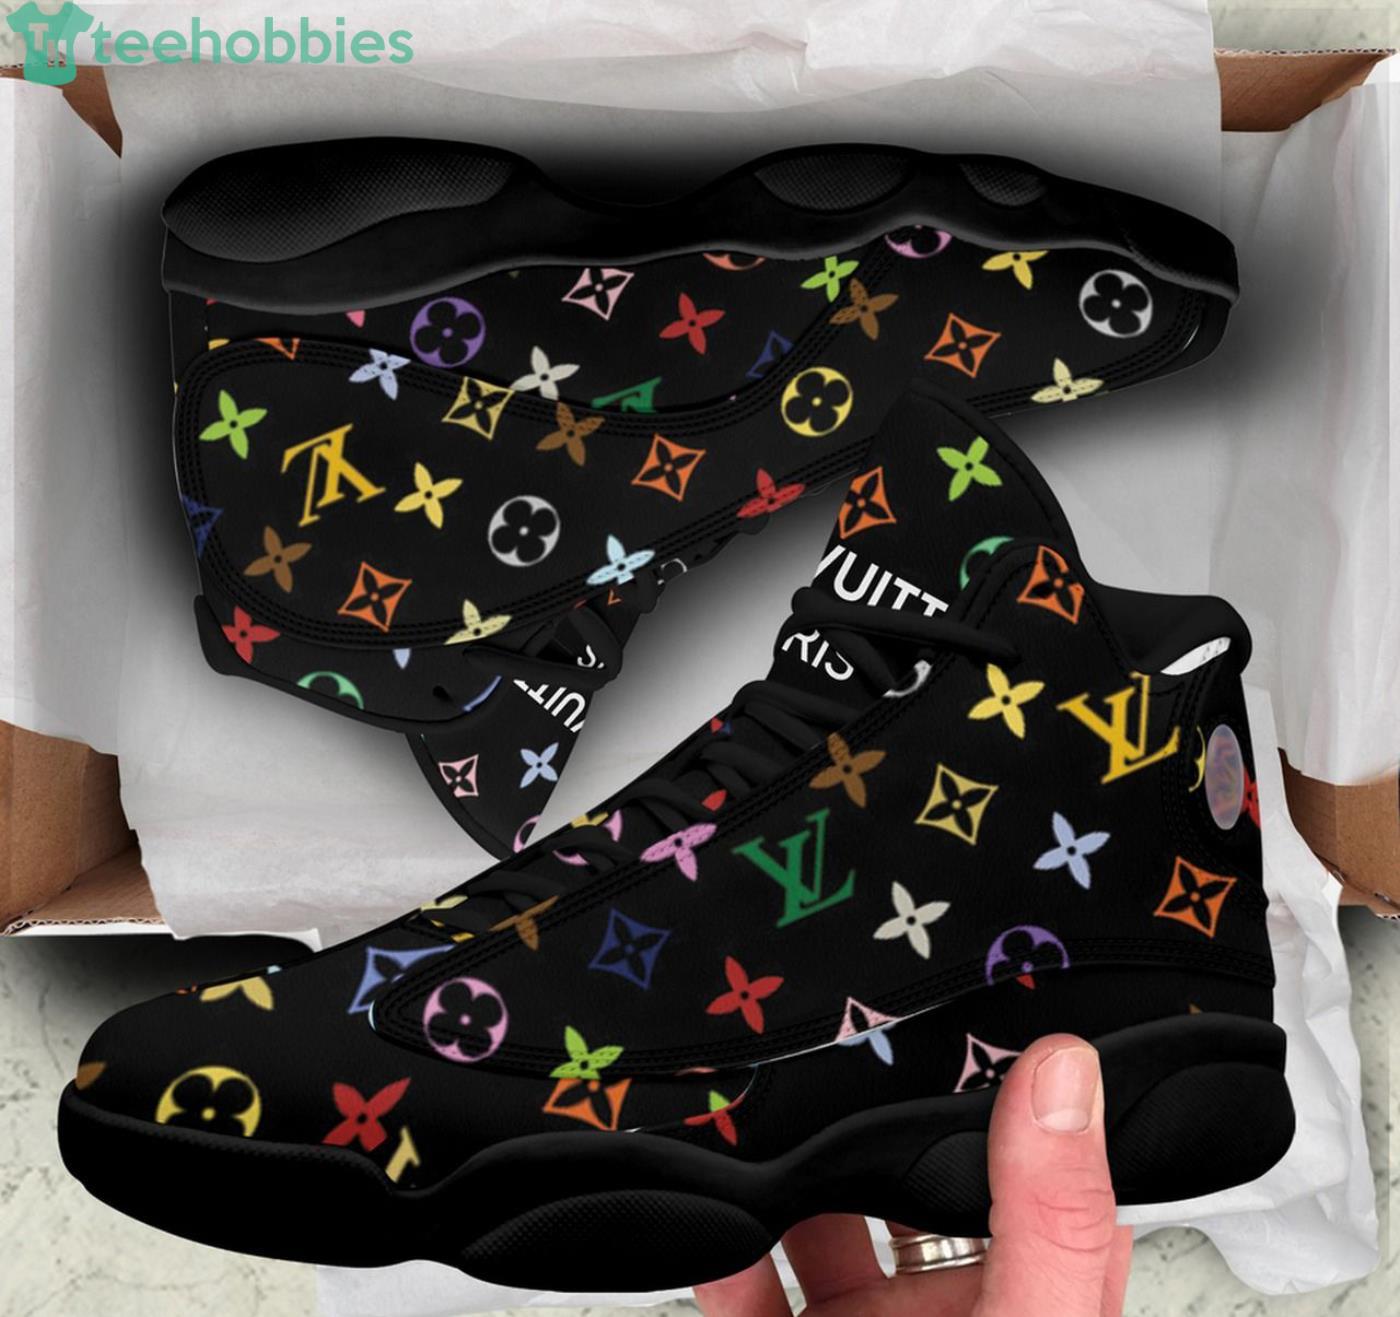 vuitton shoes sneakers